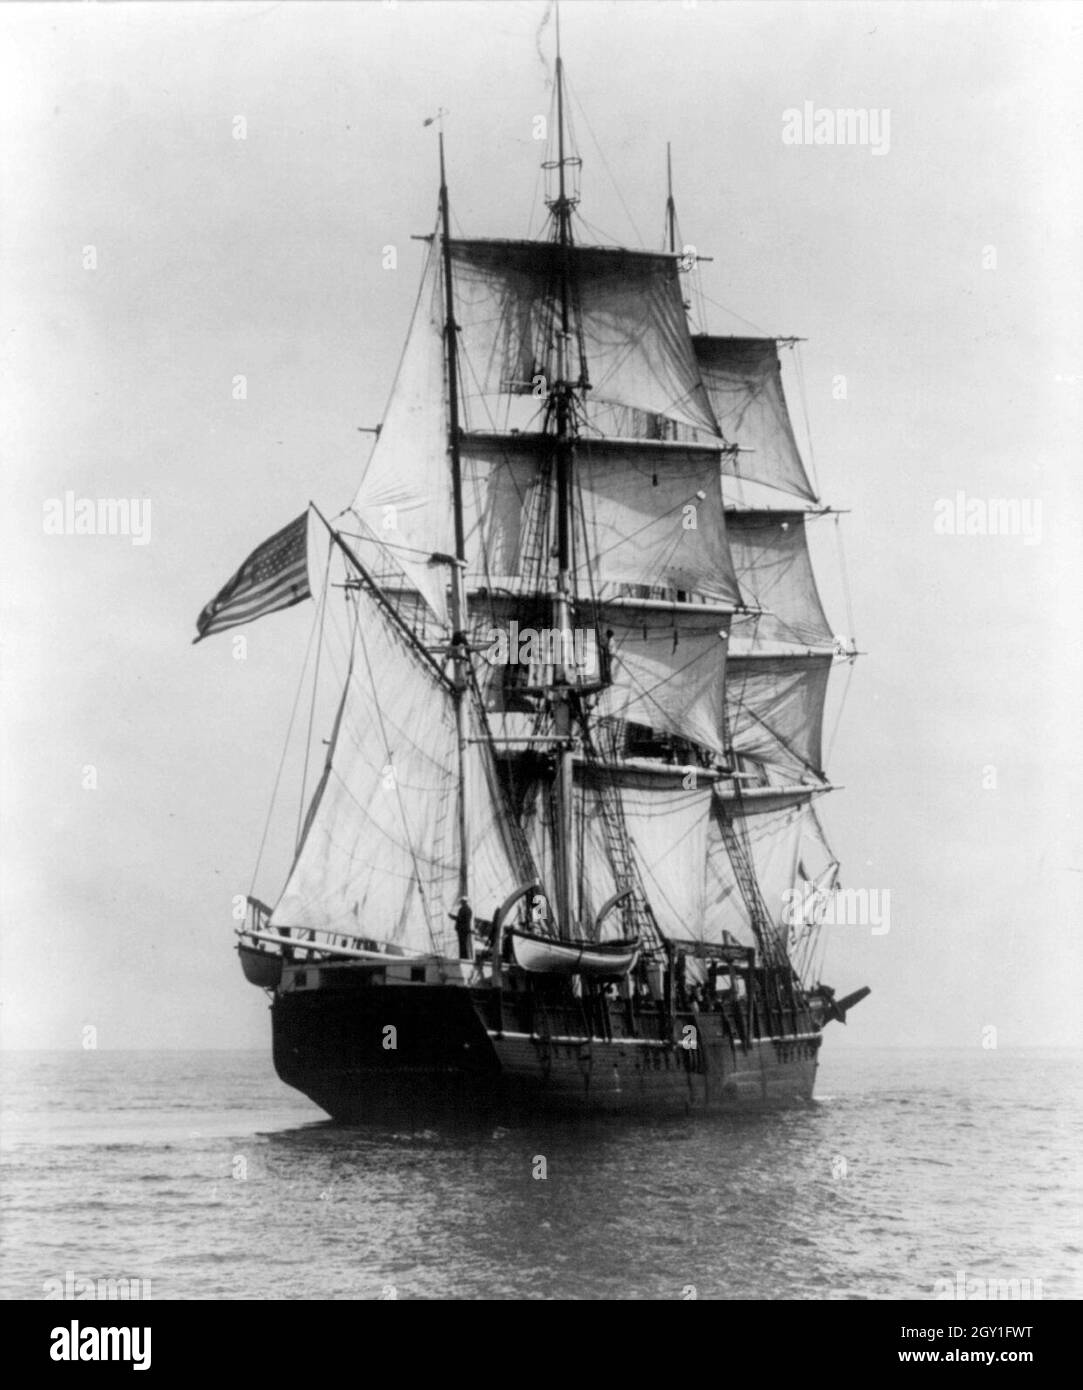 Vintage photo circa 1927 shows of the Charles W. Morgan a three masted whaling ship.   Launched in 1841 she is the world's oldest surviving merchant vessel and the only surviving wooden whaling ship from the 19th century American merchant fleet Stock Photo